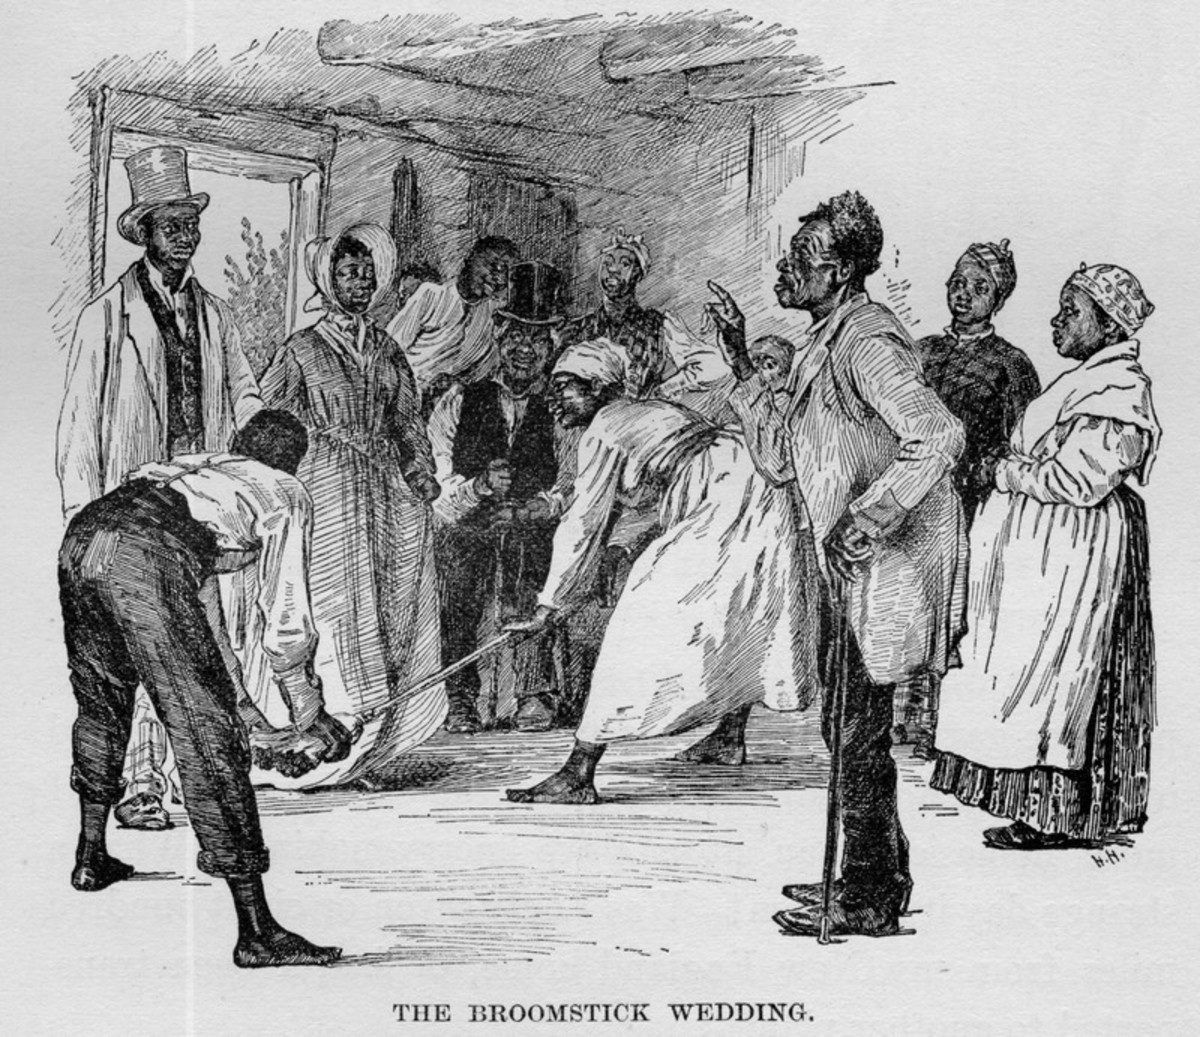 According to Harriette Cole, enslaved African Americans used broom-jumping as a cultural reminder of their African background.